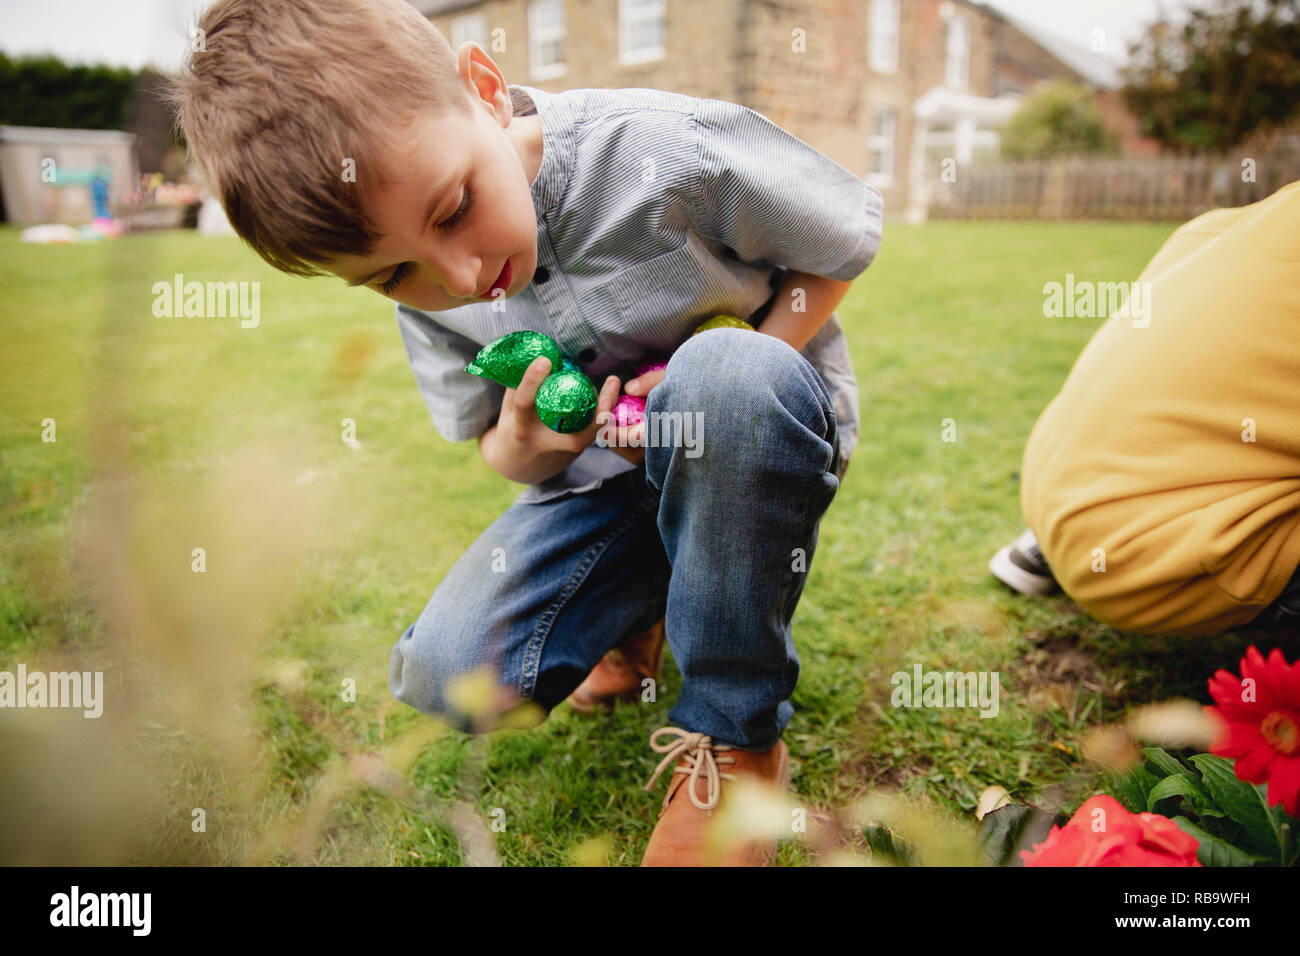 Young boy on an easter egg hunt with a friend. They are seaching for chocolate easter eggs in a back garden. Stock Photo